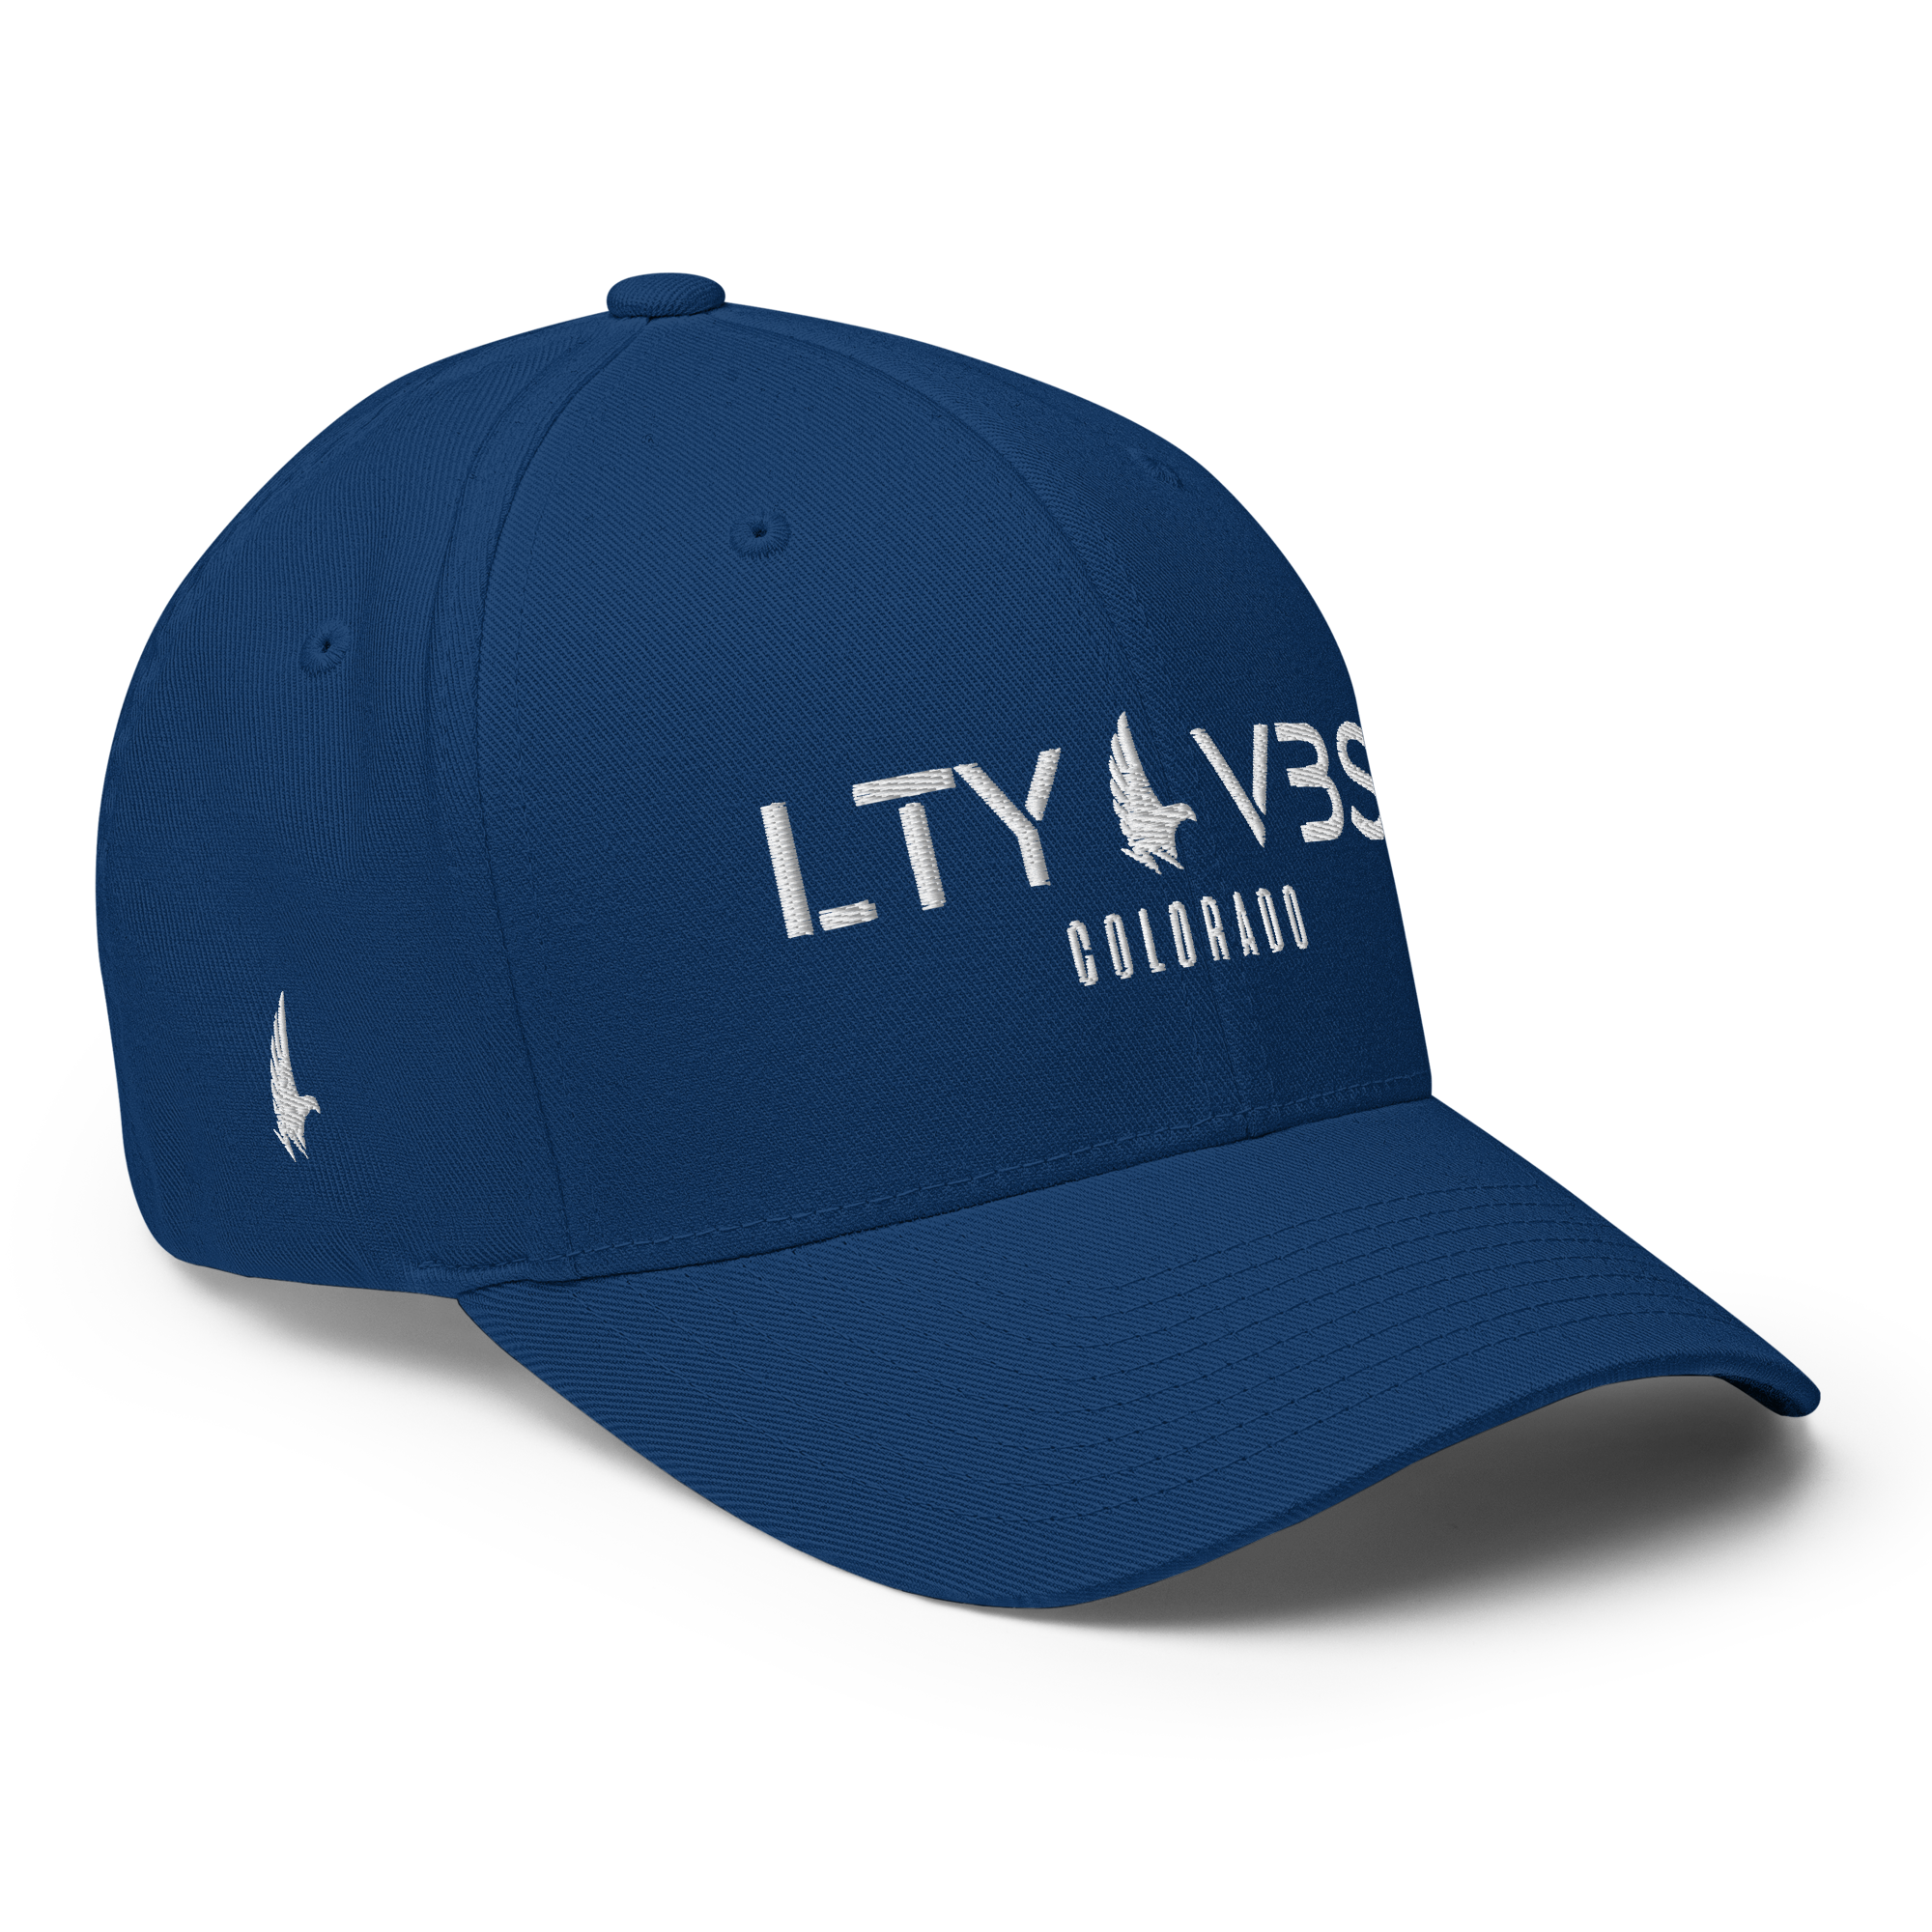 Loyalty Era Colorado Fitted Hat - Blue / White Fitted - Loyalty Vibes